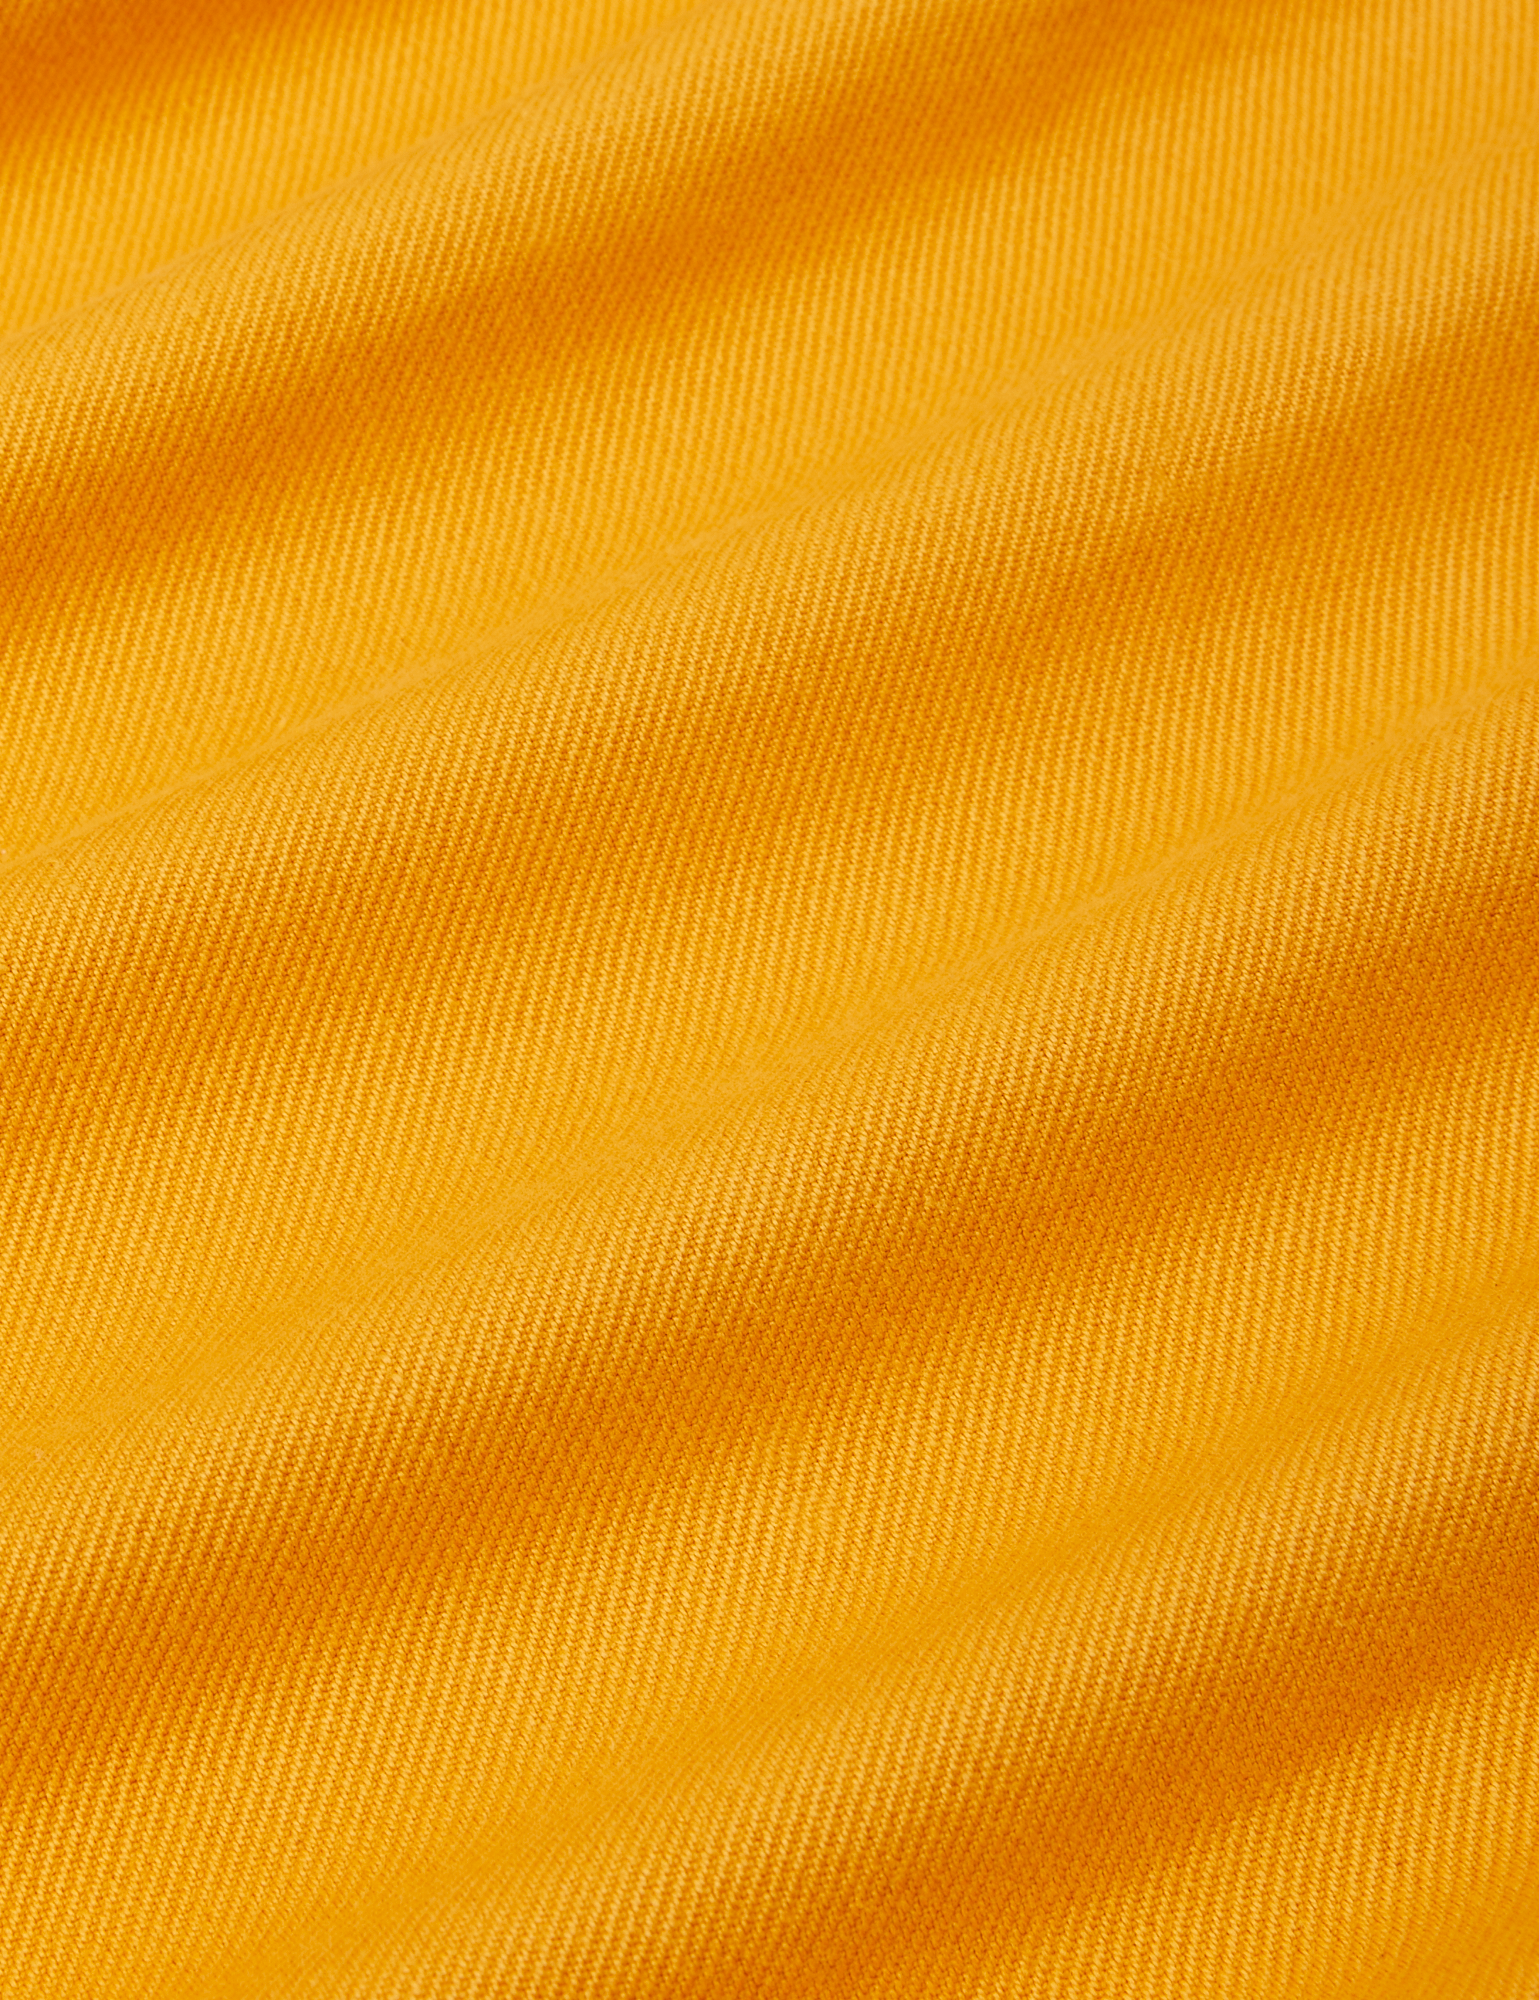 Flannel Overshirt in Mustard Yellow fabric detail close up